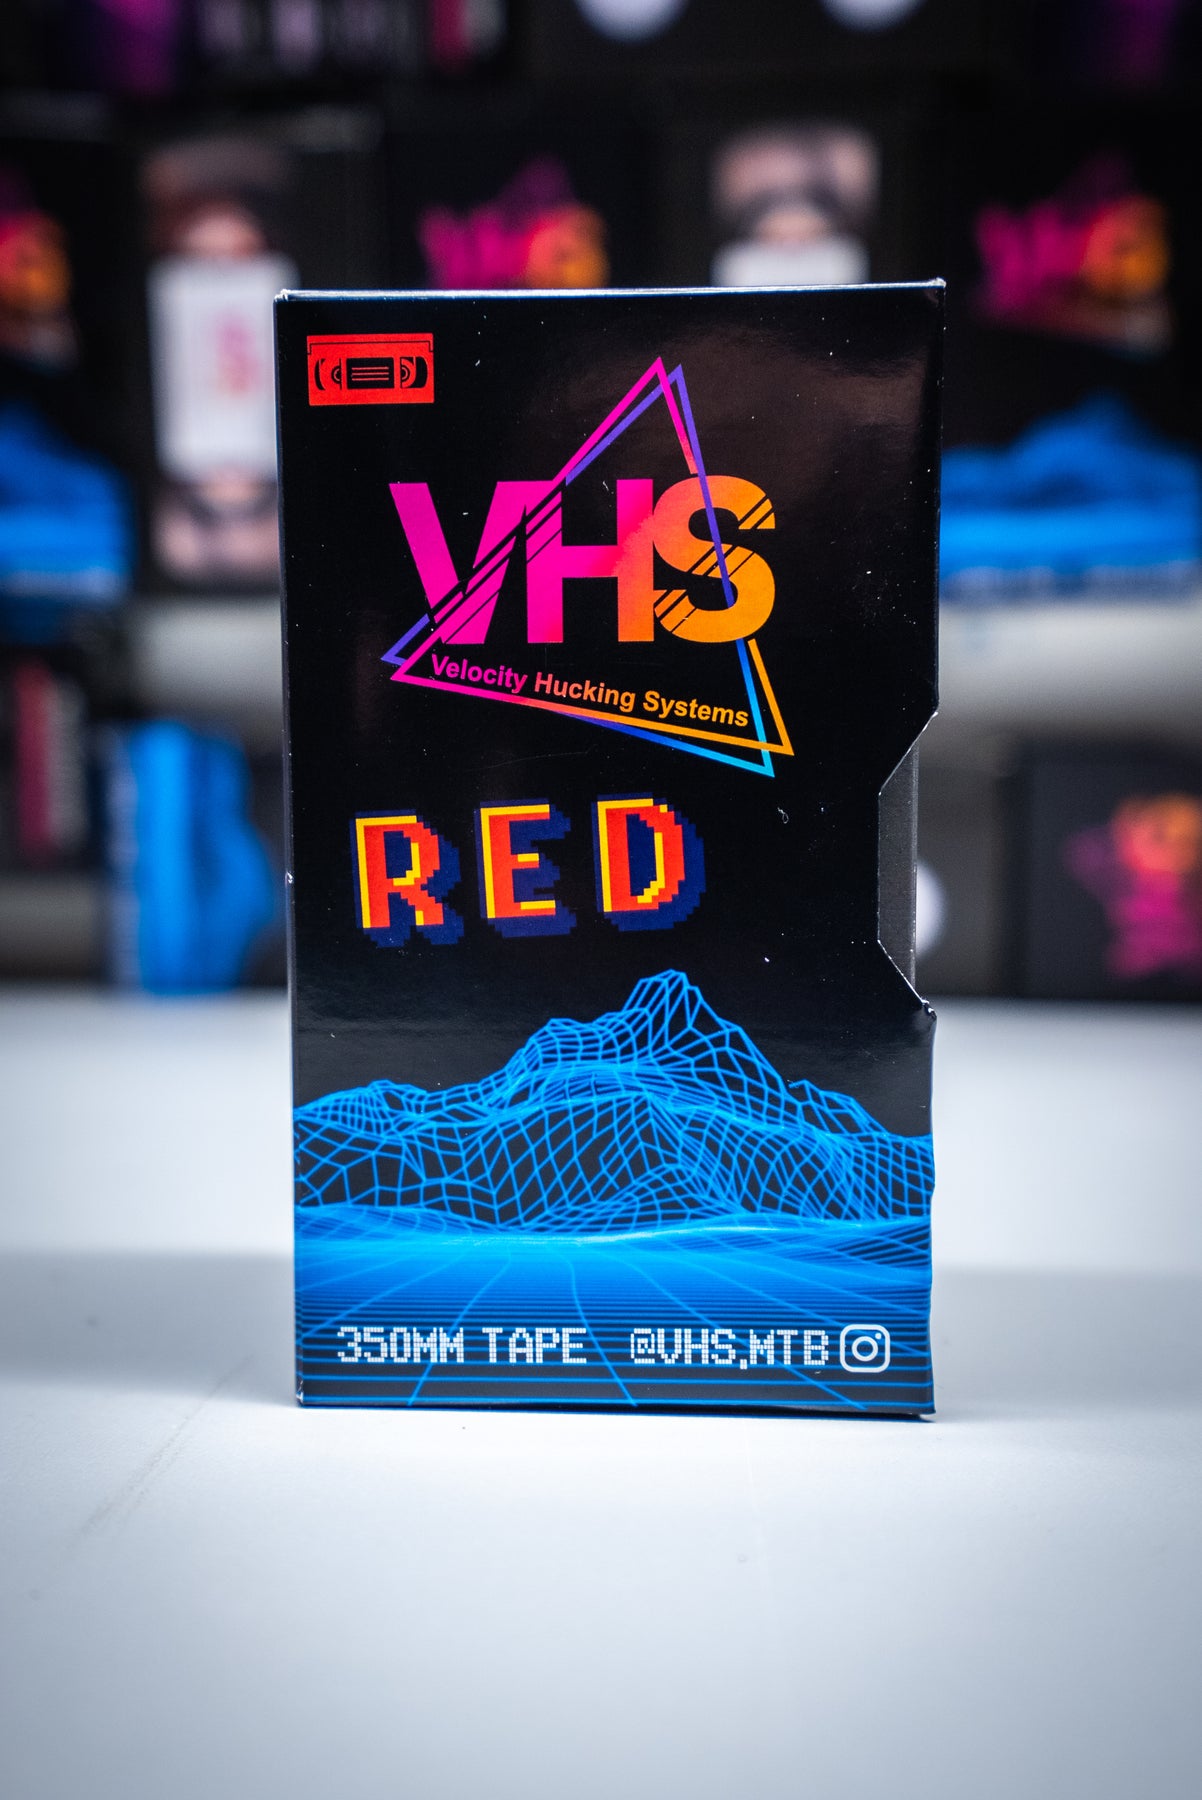 VHS 2.0 Colour Tape – Velocity Hucking Systems UK